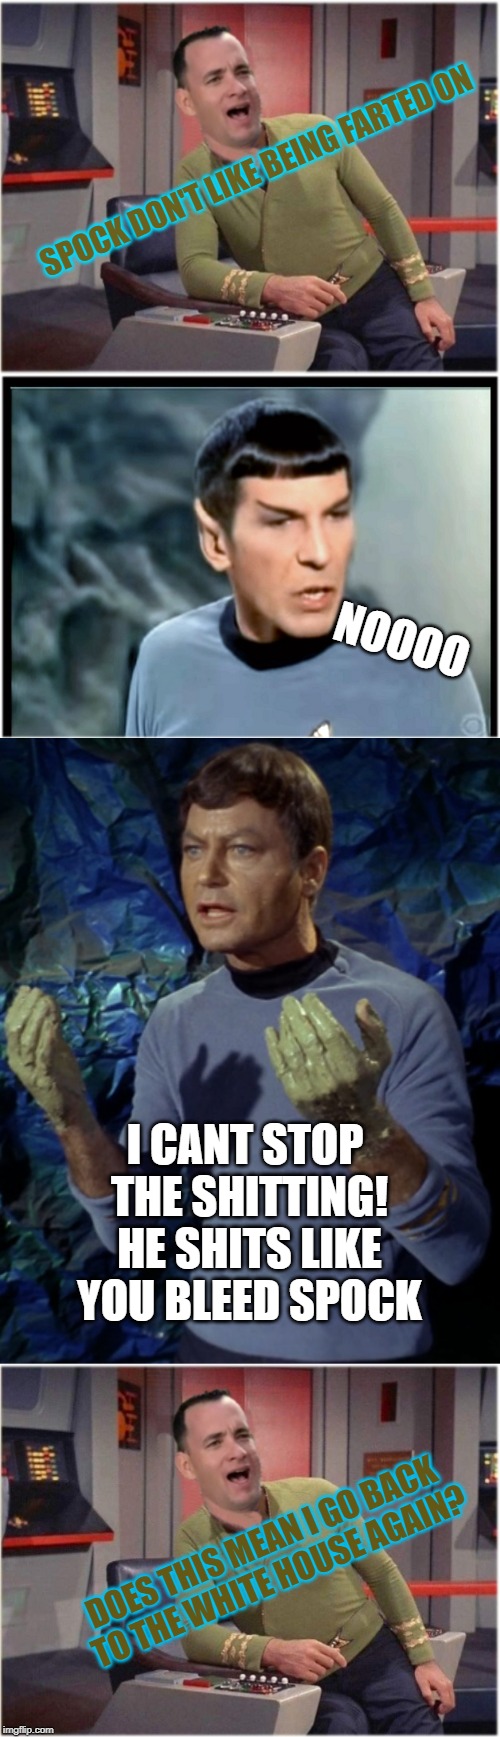 SPOCK DON'T LIKE BEING FARTED ON; NOOOO; I CANT STOP THE SHITTING! HE SHITS LIKE YOU BLEED SPOCK; DOES THIS MEAN I GO BACK TO THE WHITE HOUSE AGAIN? | image tagged in capt forrest kirk | made w/ Imgflip meme maker